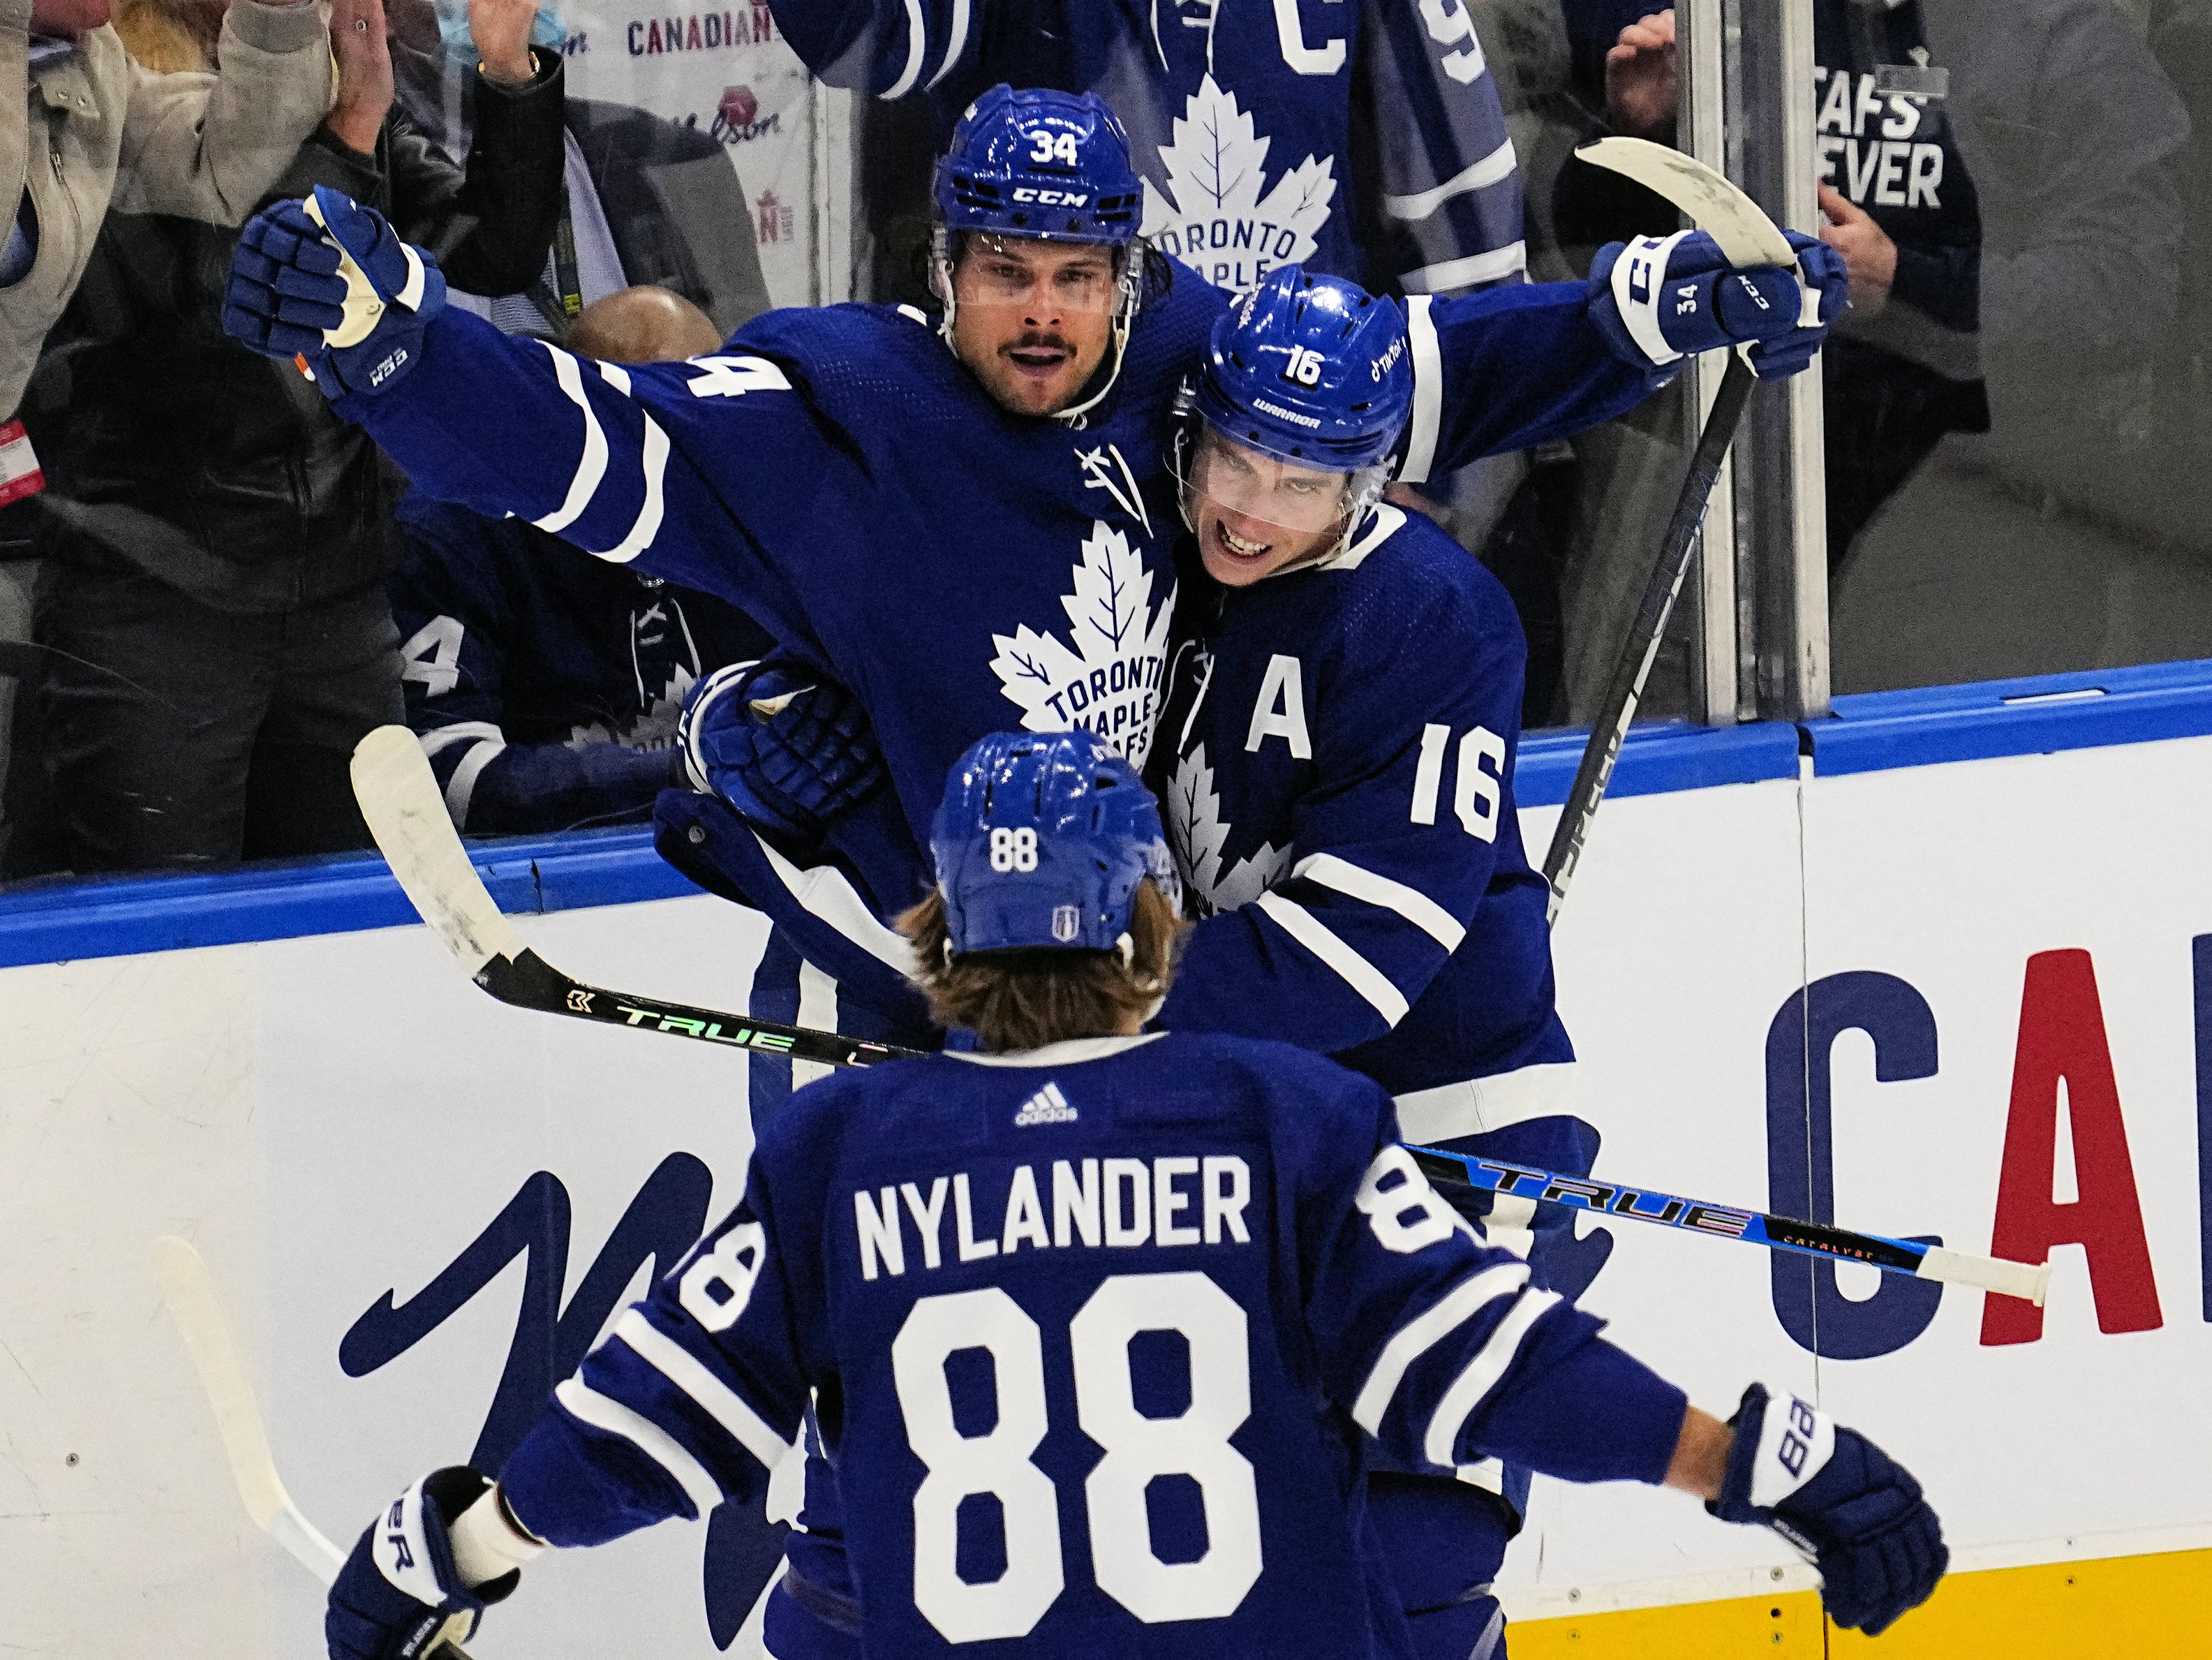 Toronto Maple Leafs blank Tampa Bay Lightning in electric Game 1